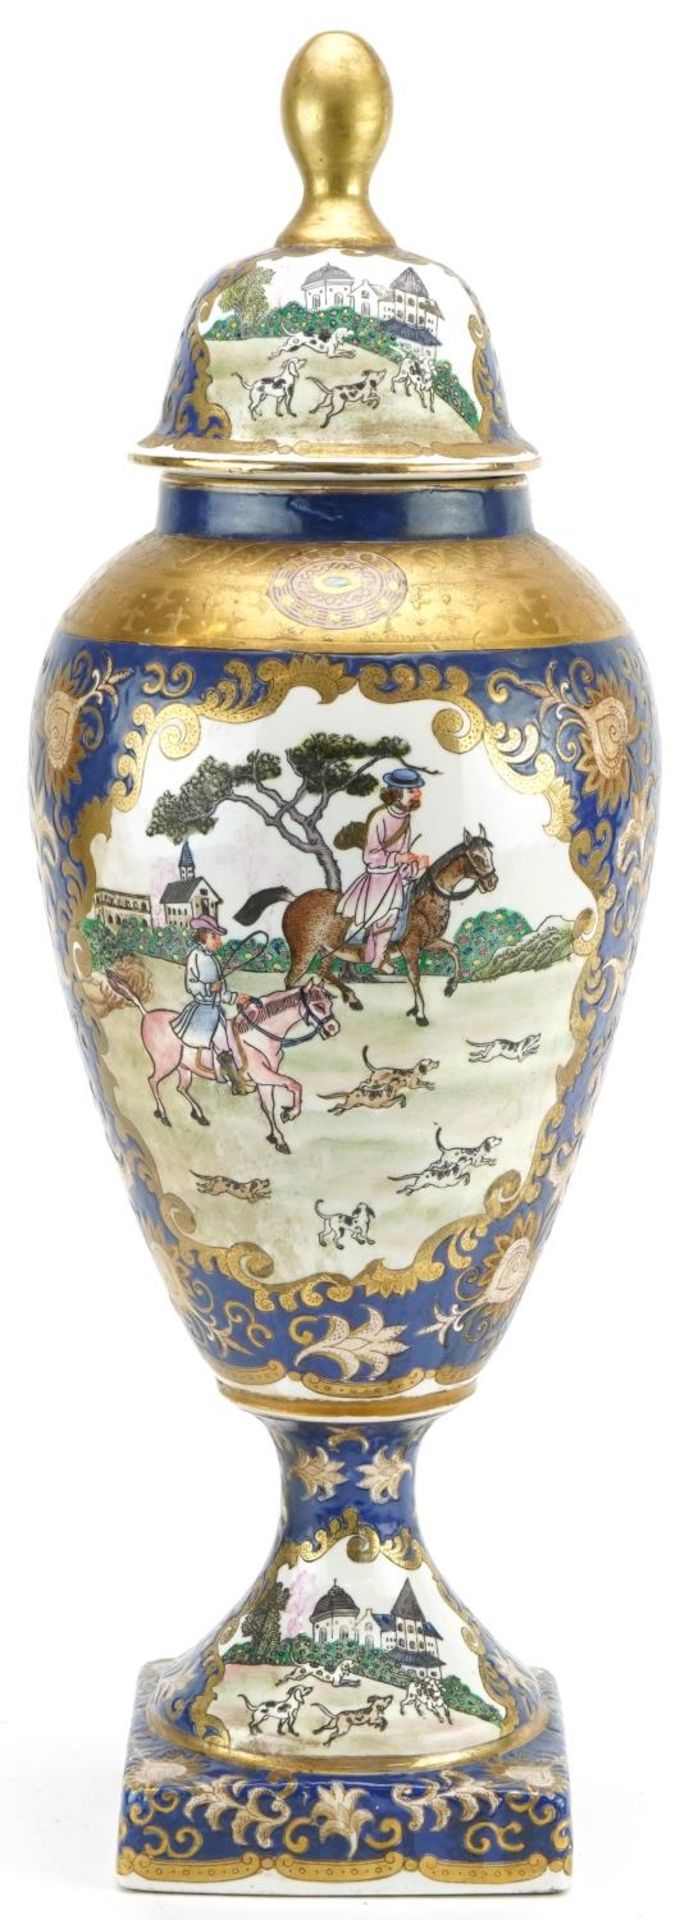 European Chinese style porcelain vase and cover hand painted with panels of figures and animals,